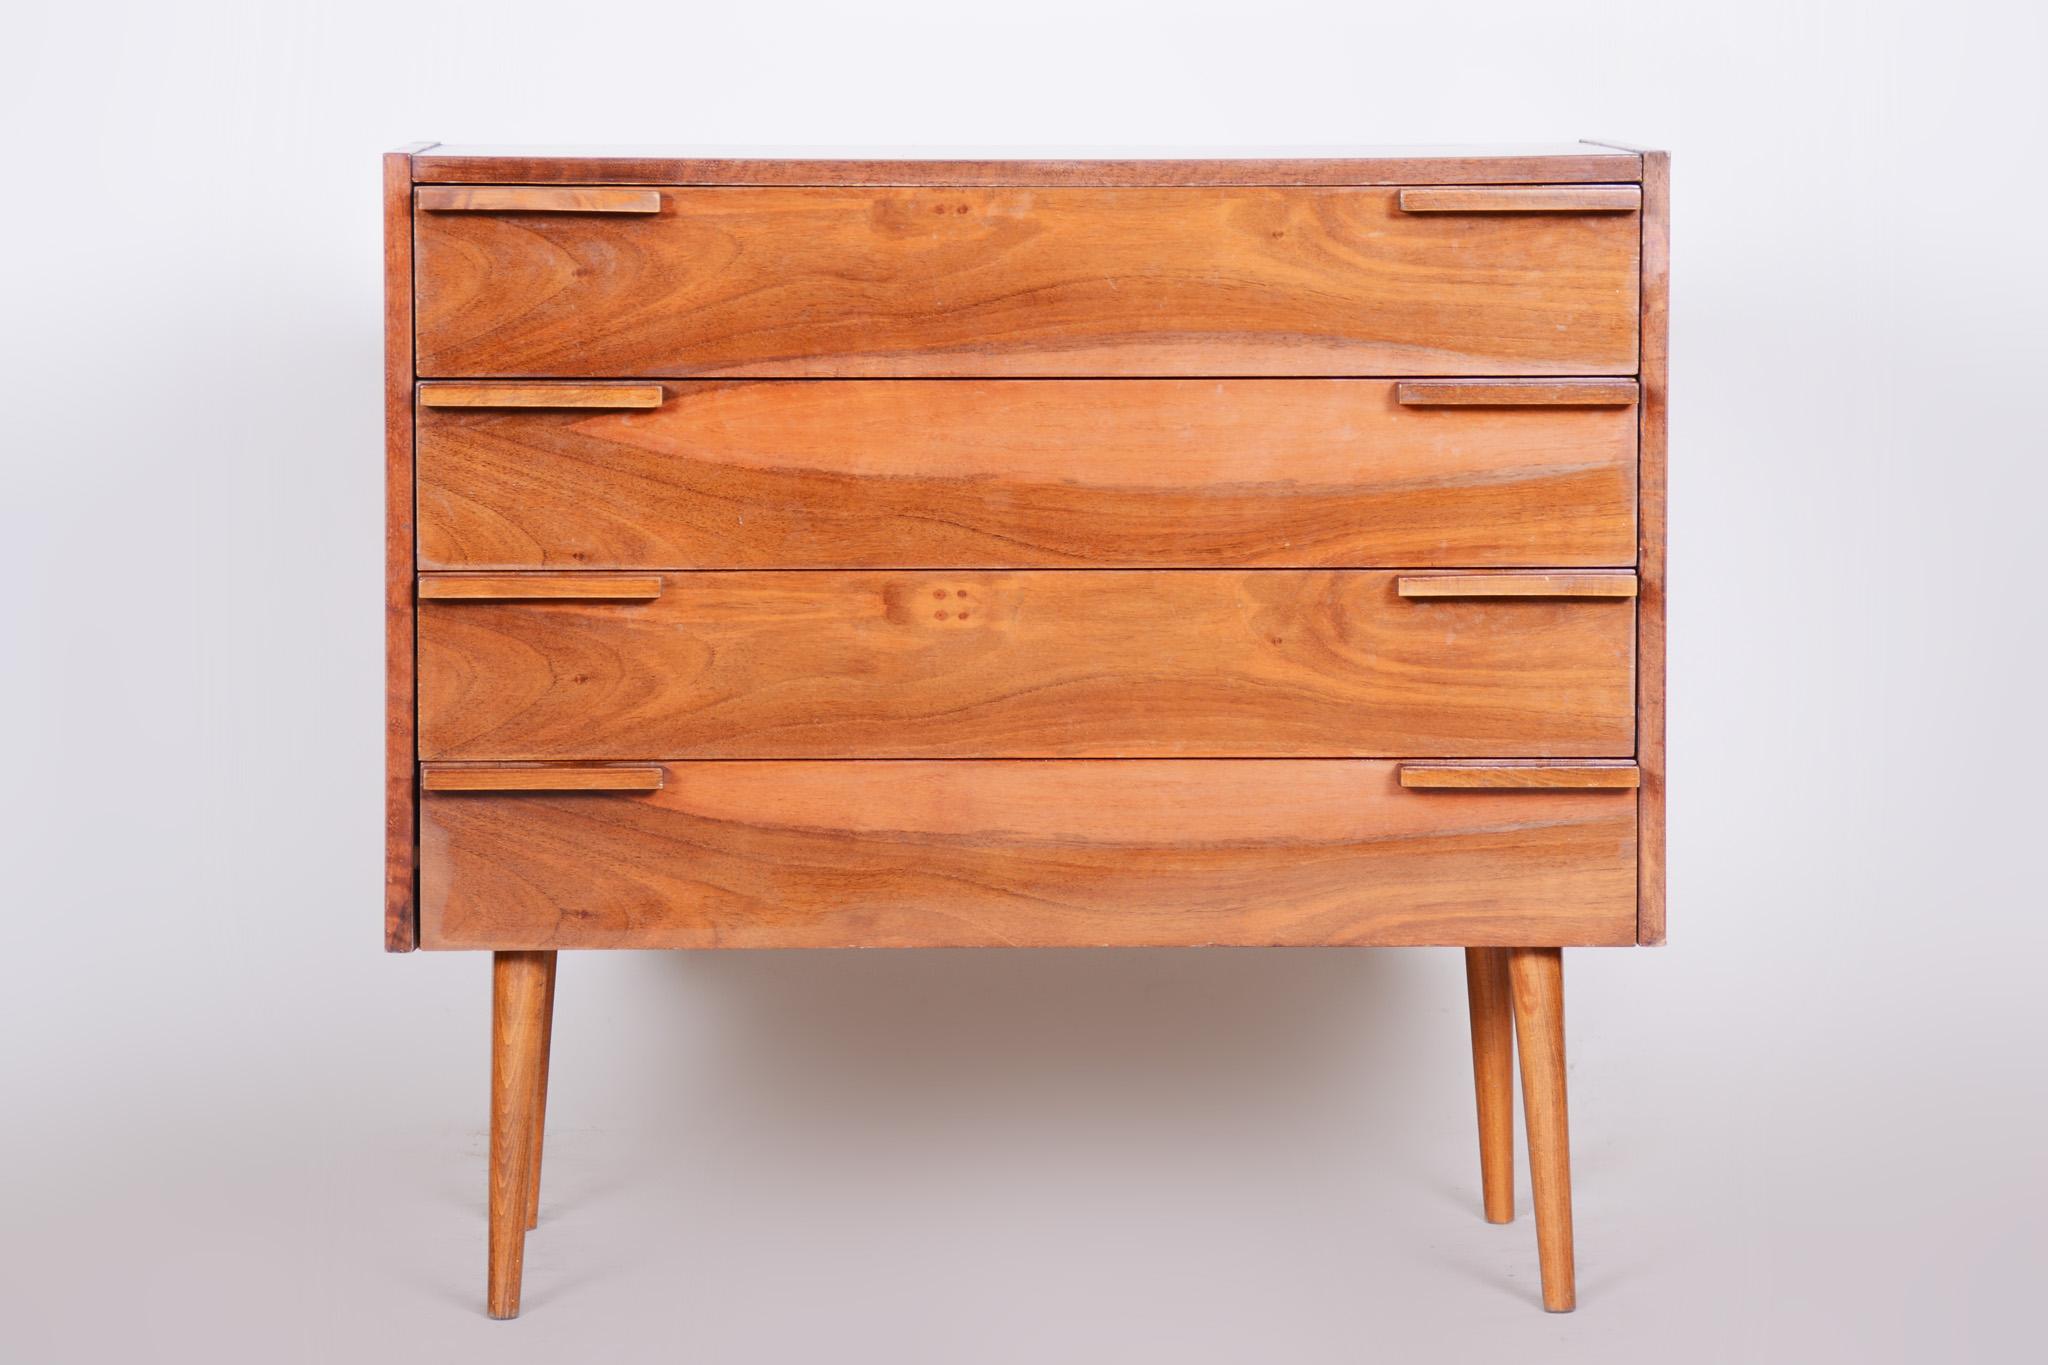 Mid century chest of drawers, commode.
Original condition, not restored
Country of origin is Czechia, 1960s.
Material: Walnut.

